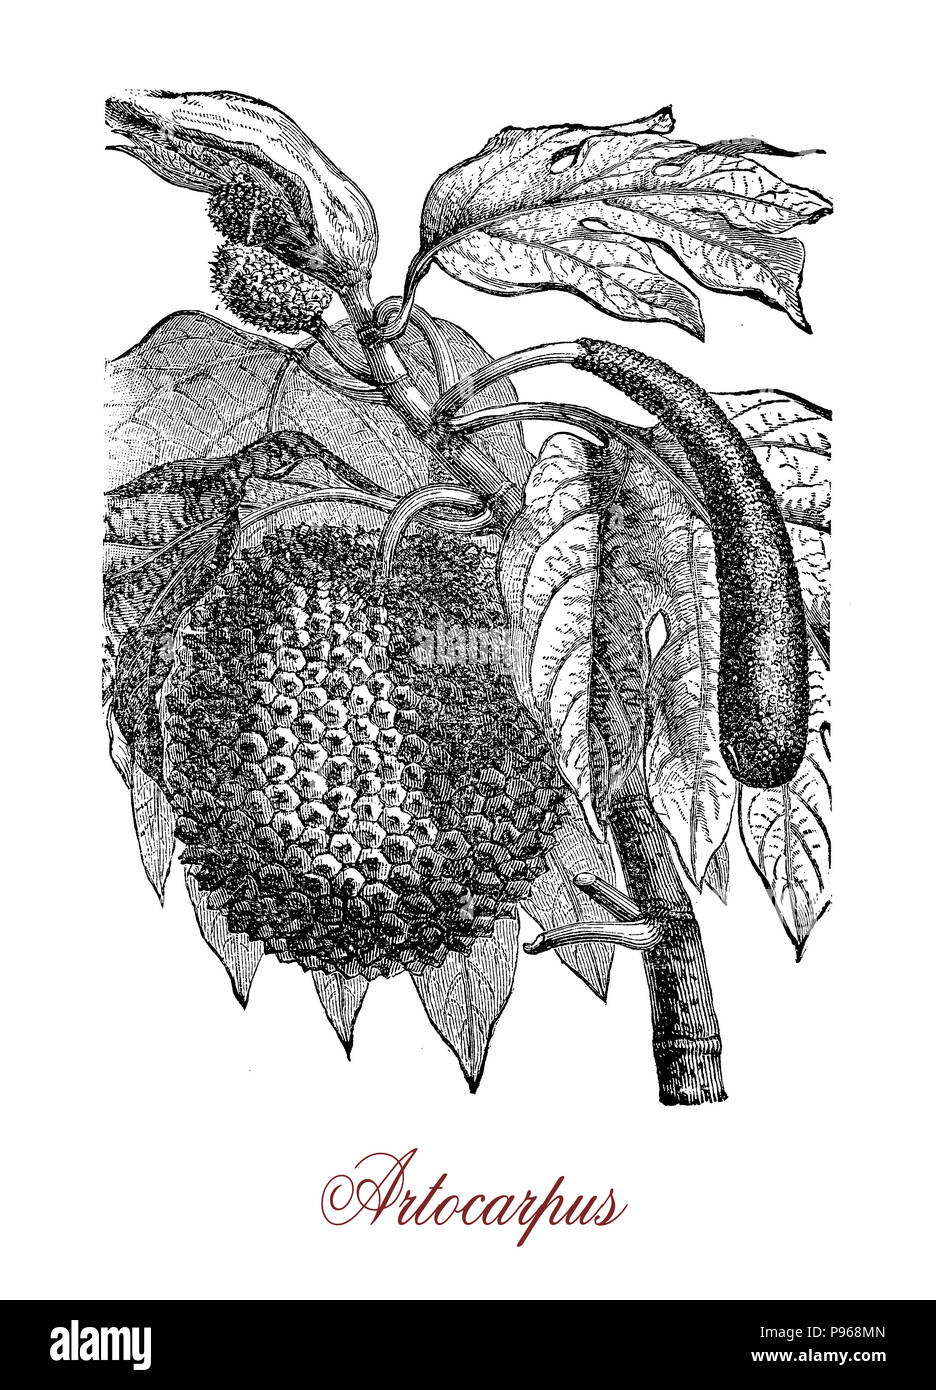 Vintage engraving of Artocarpus, tropical tree of Southeast Asia and Pacific commonly cultivated for the edible fruits called breadfruits. Stock Photo